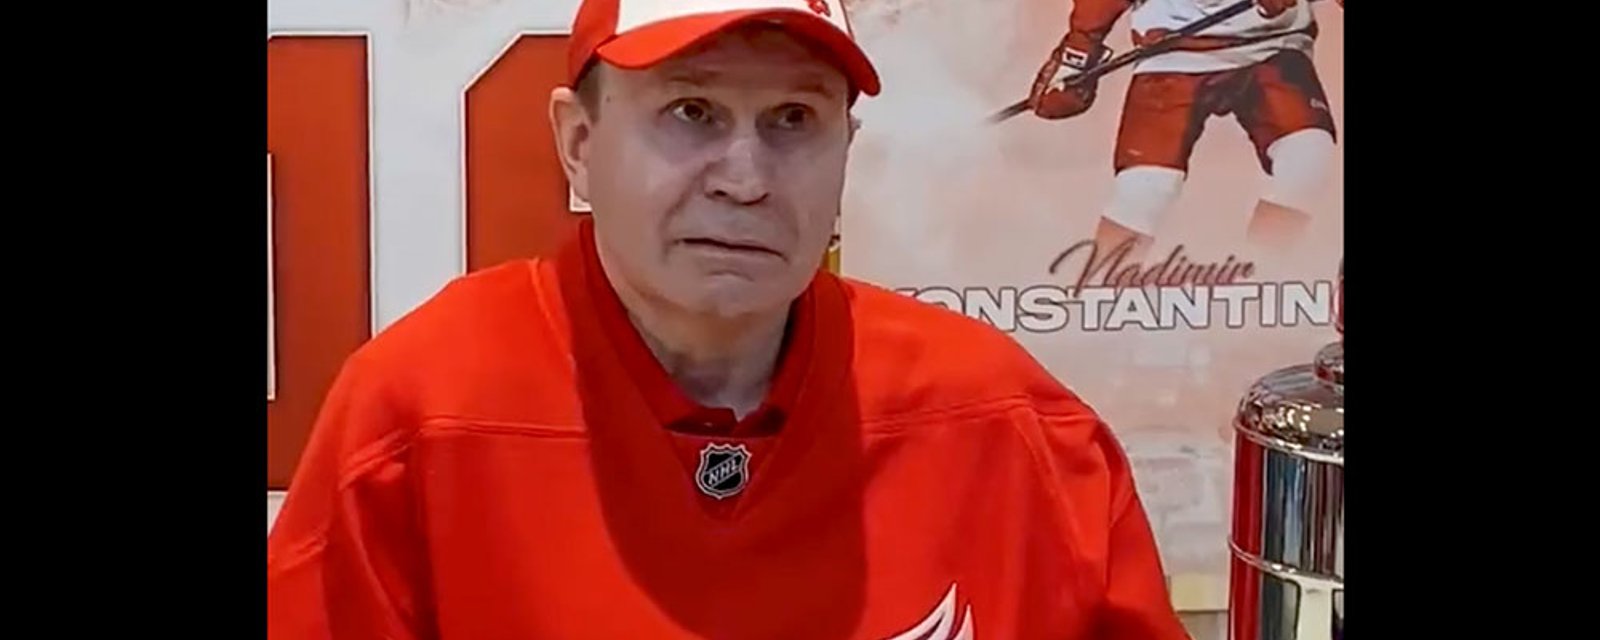 Vladimir Konstantinov names his candidate for best Red Wings player 